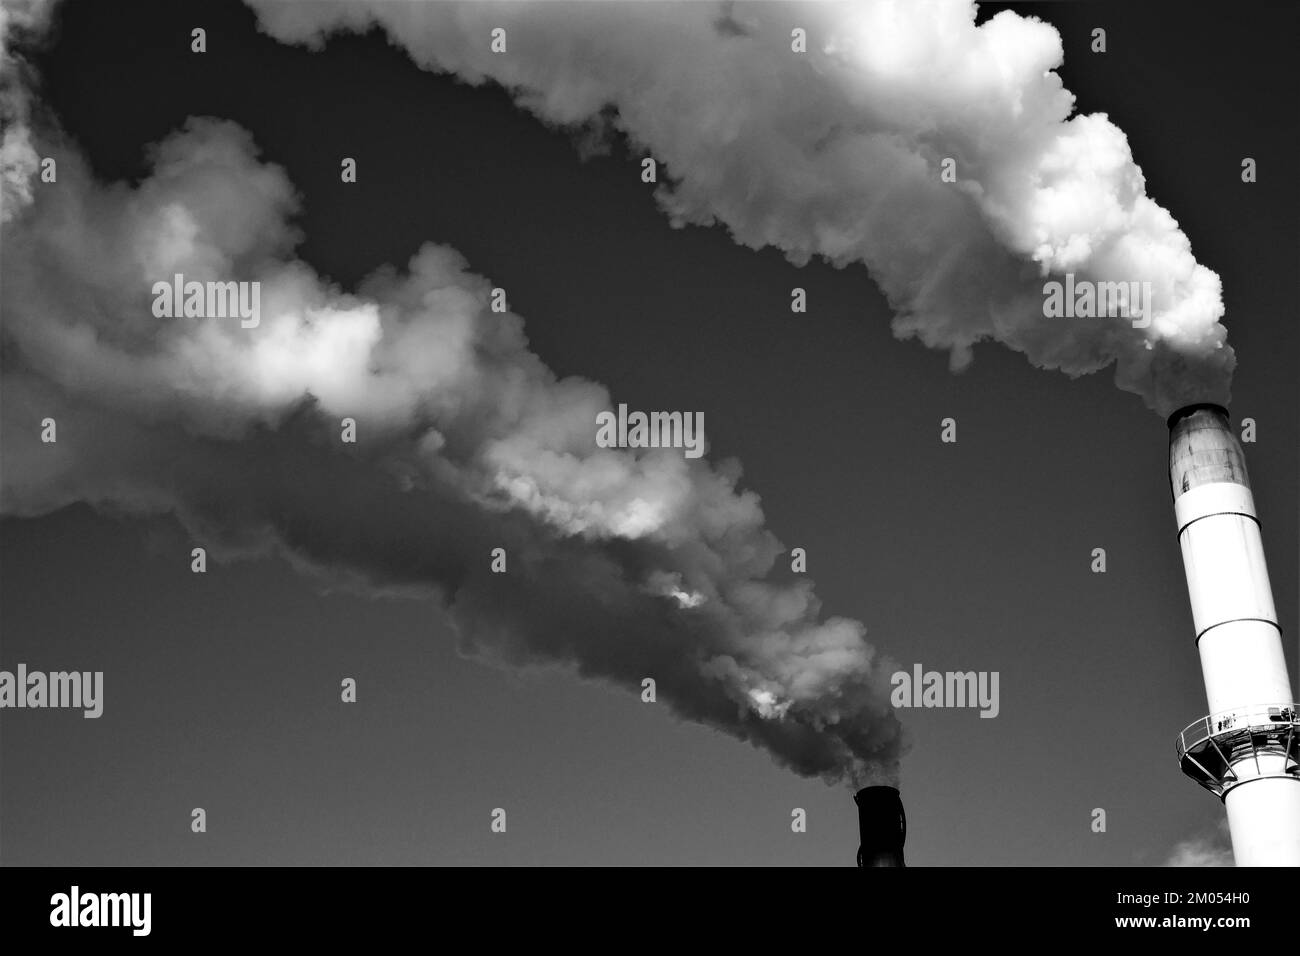 Smoke billowing out of tall industrial chimneys against a clear sky in Australia, in black and white Stock Photo